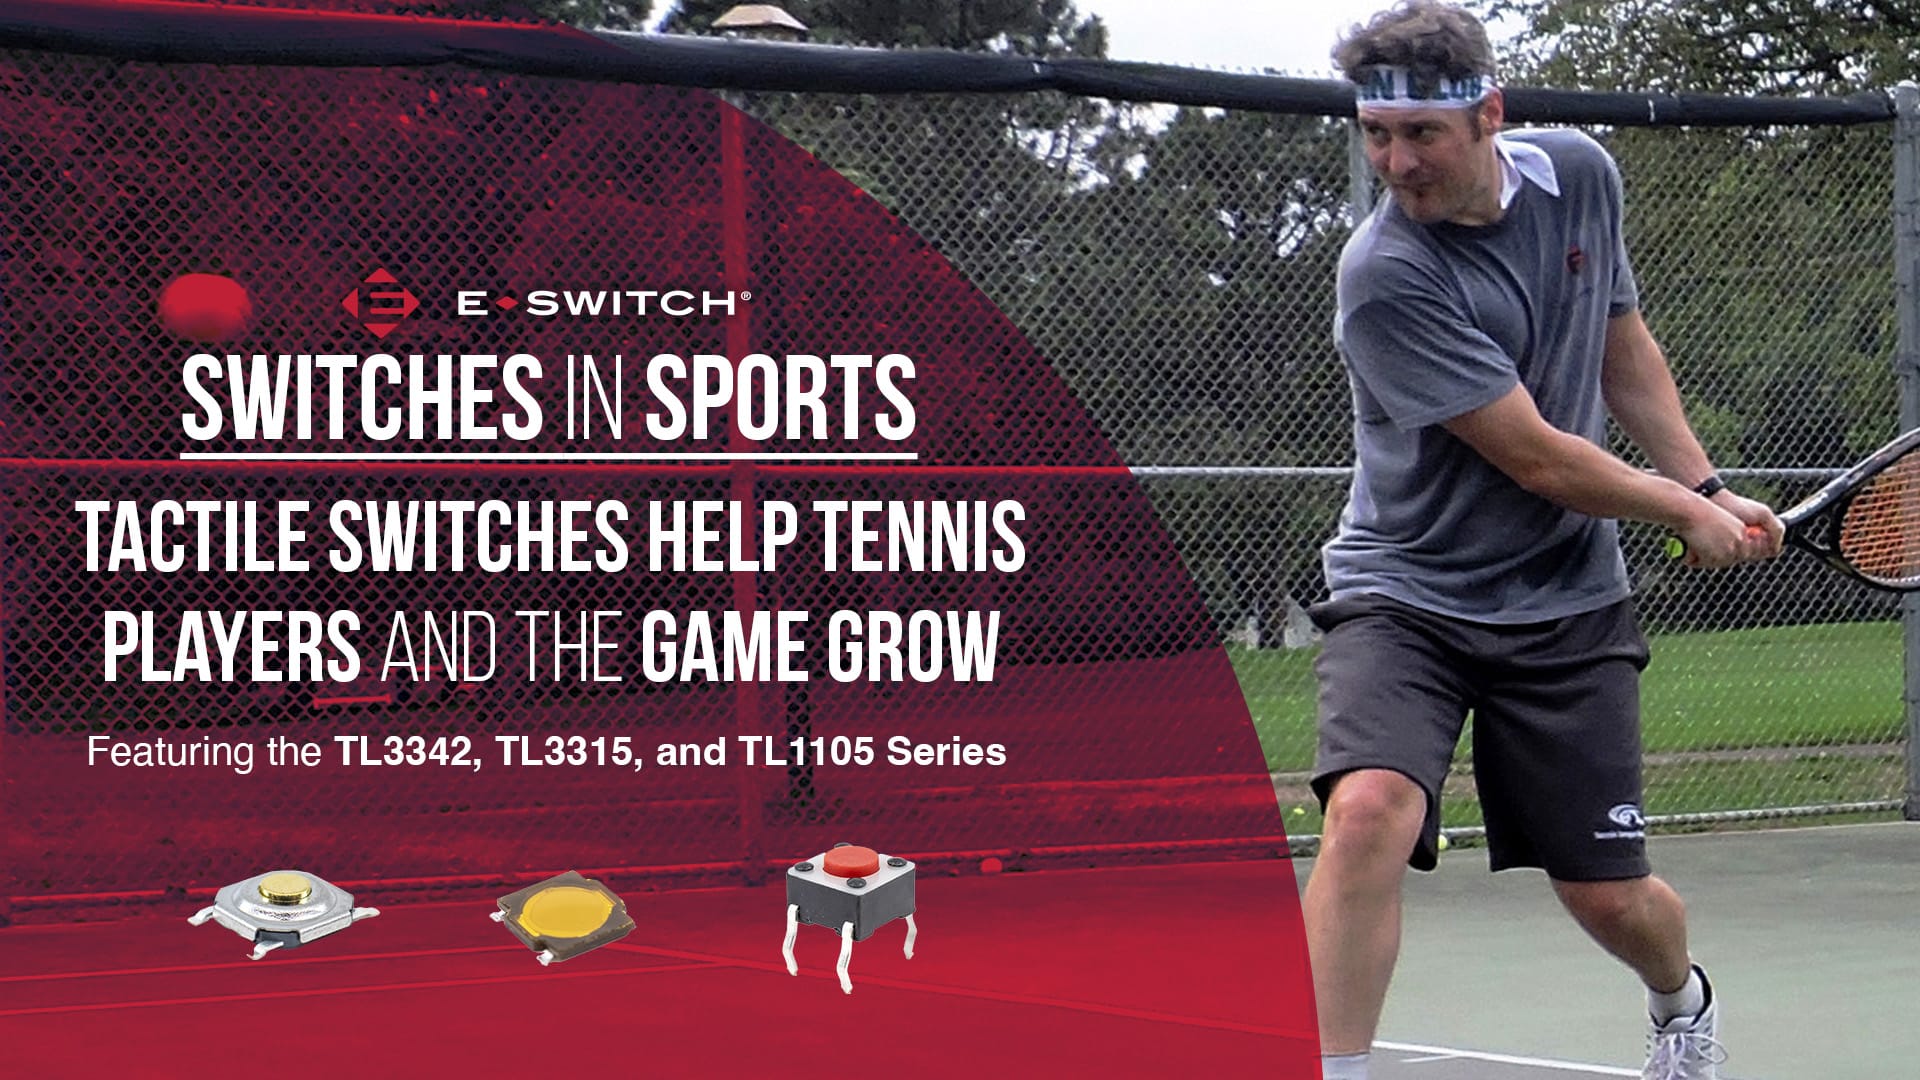 Switches In Sports: Tactile Switches Help Tennis Players and the Game Grow